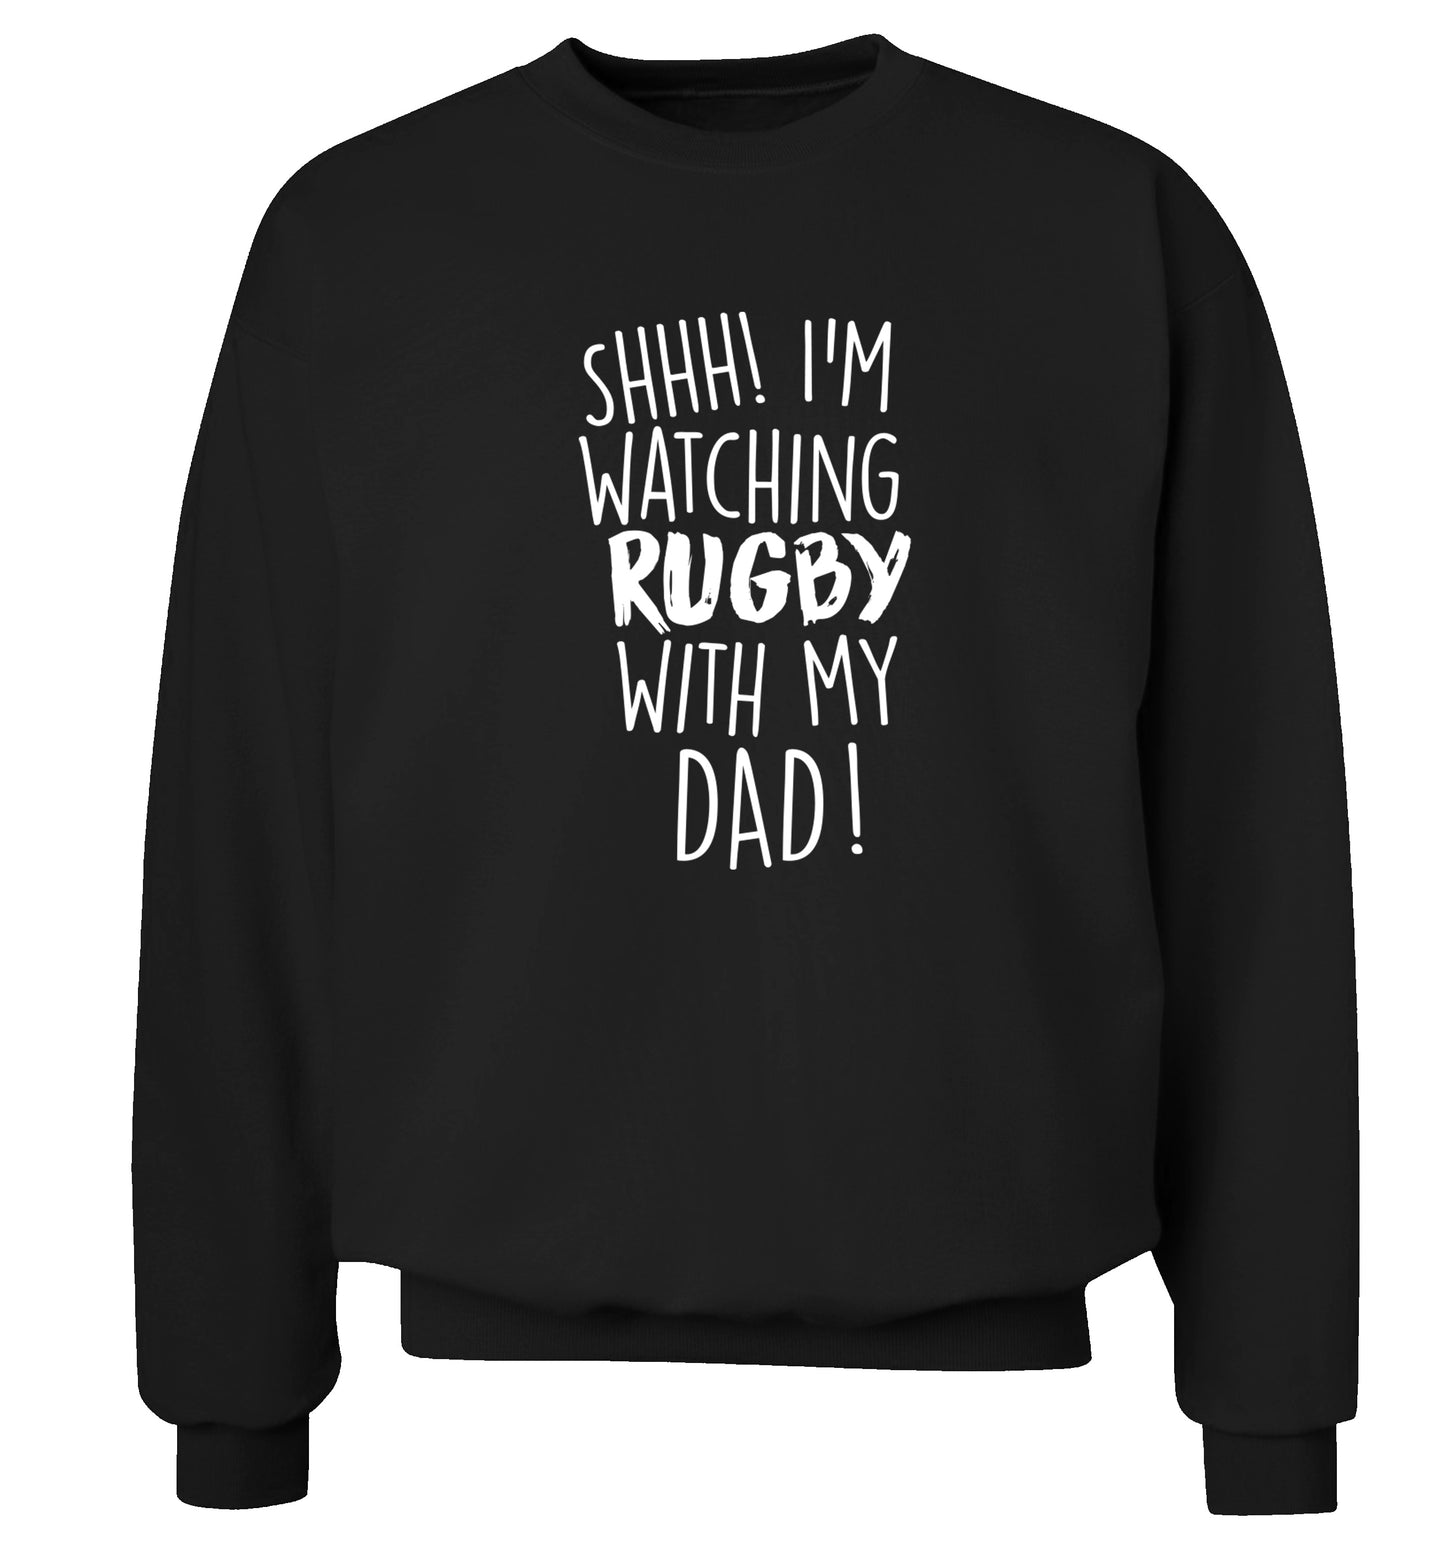 Shh... I'm watching rugby with my dad Adult's unisex black Sweater 2XL